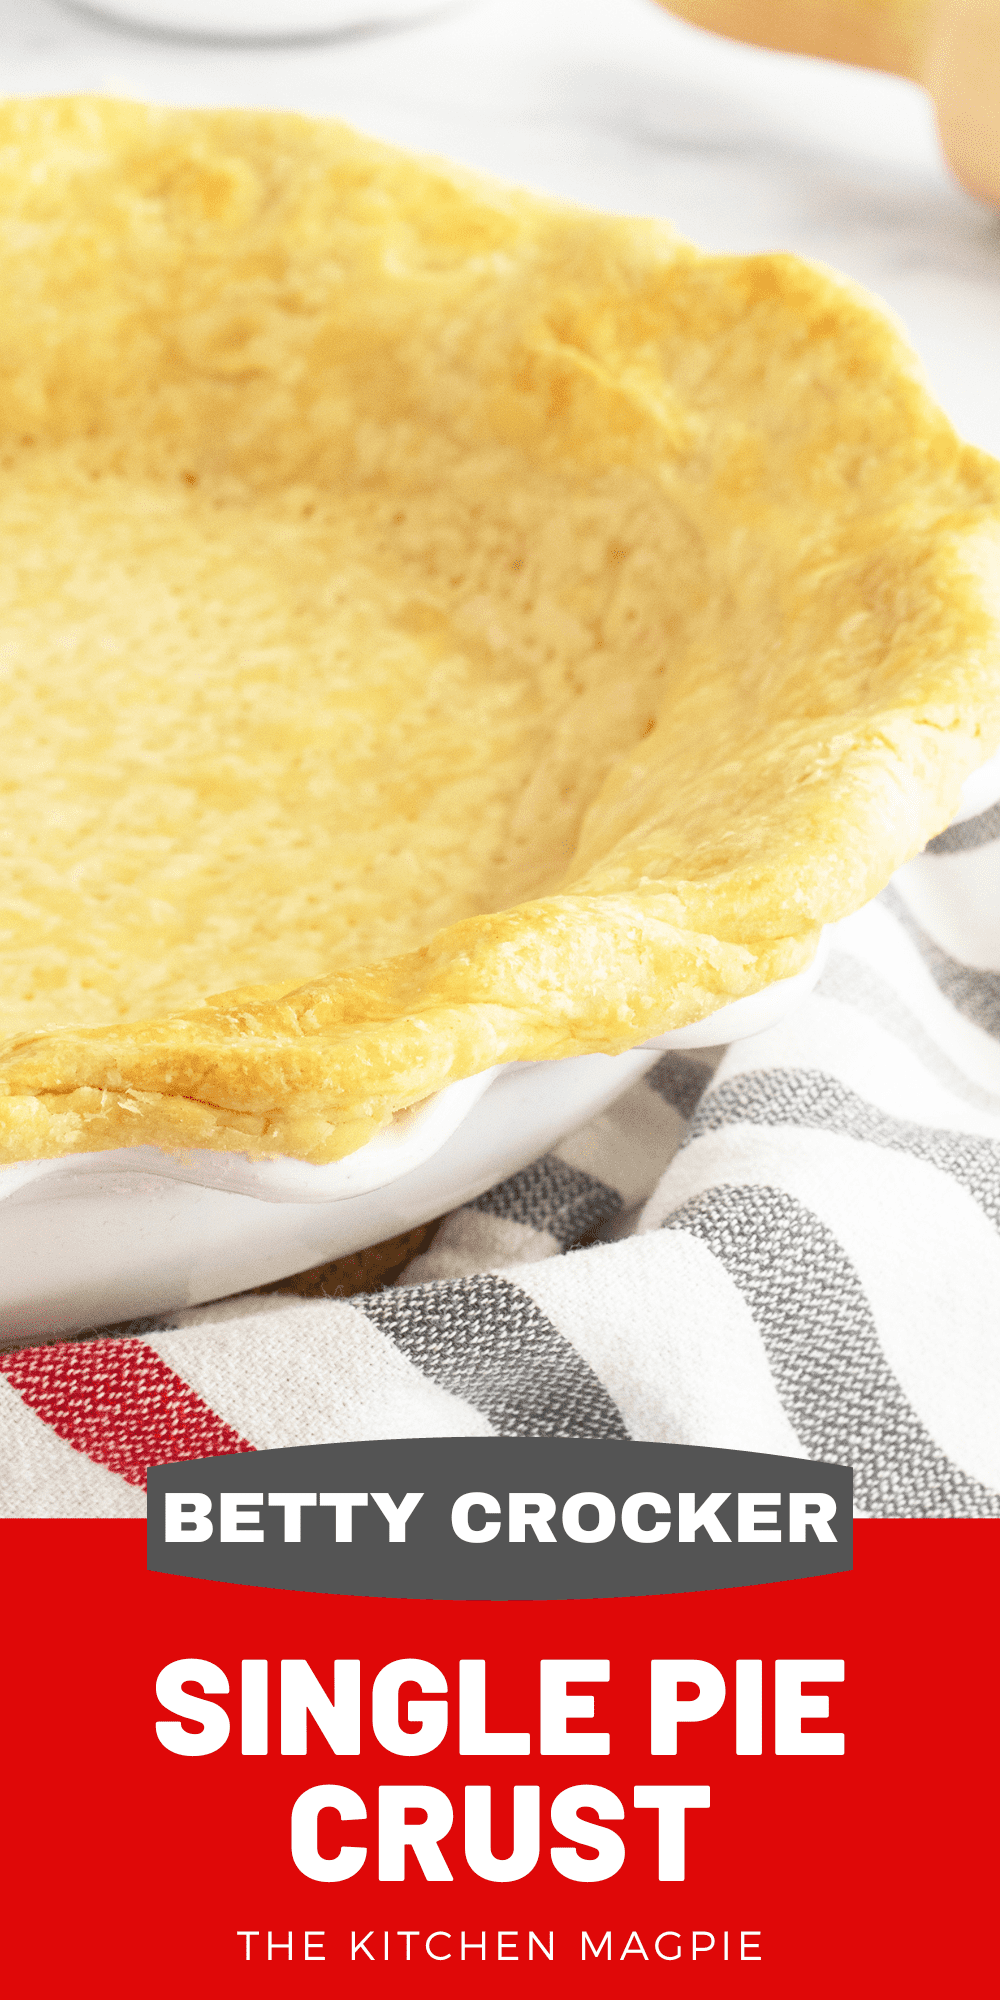 An easy, single pie crust recipe that turns out beautifully golden and flaky every time!